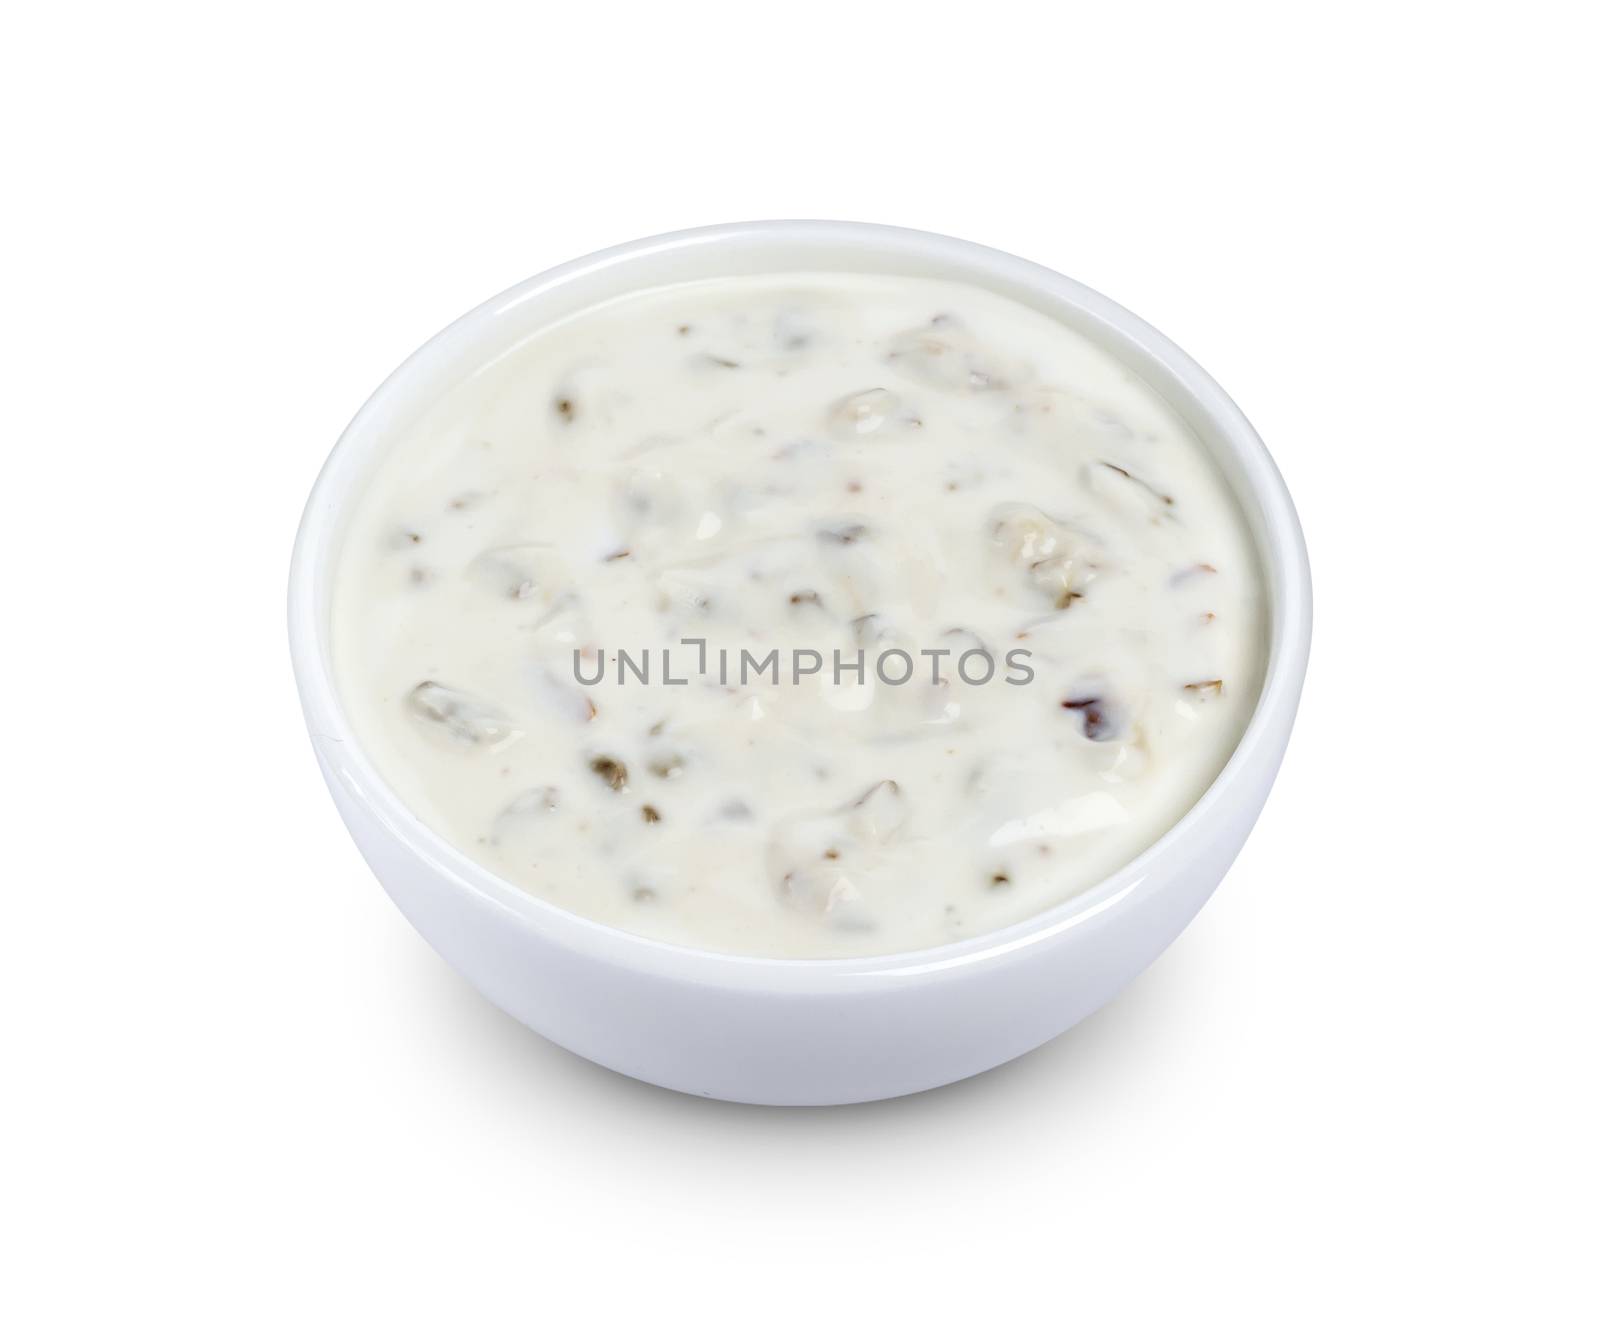 Sour cream with mushrooms. Mushroom sauce in bowl isolated on white background with clipping path